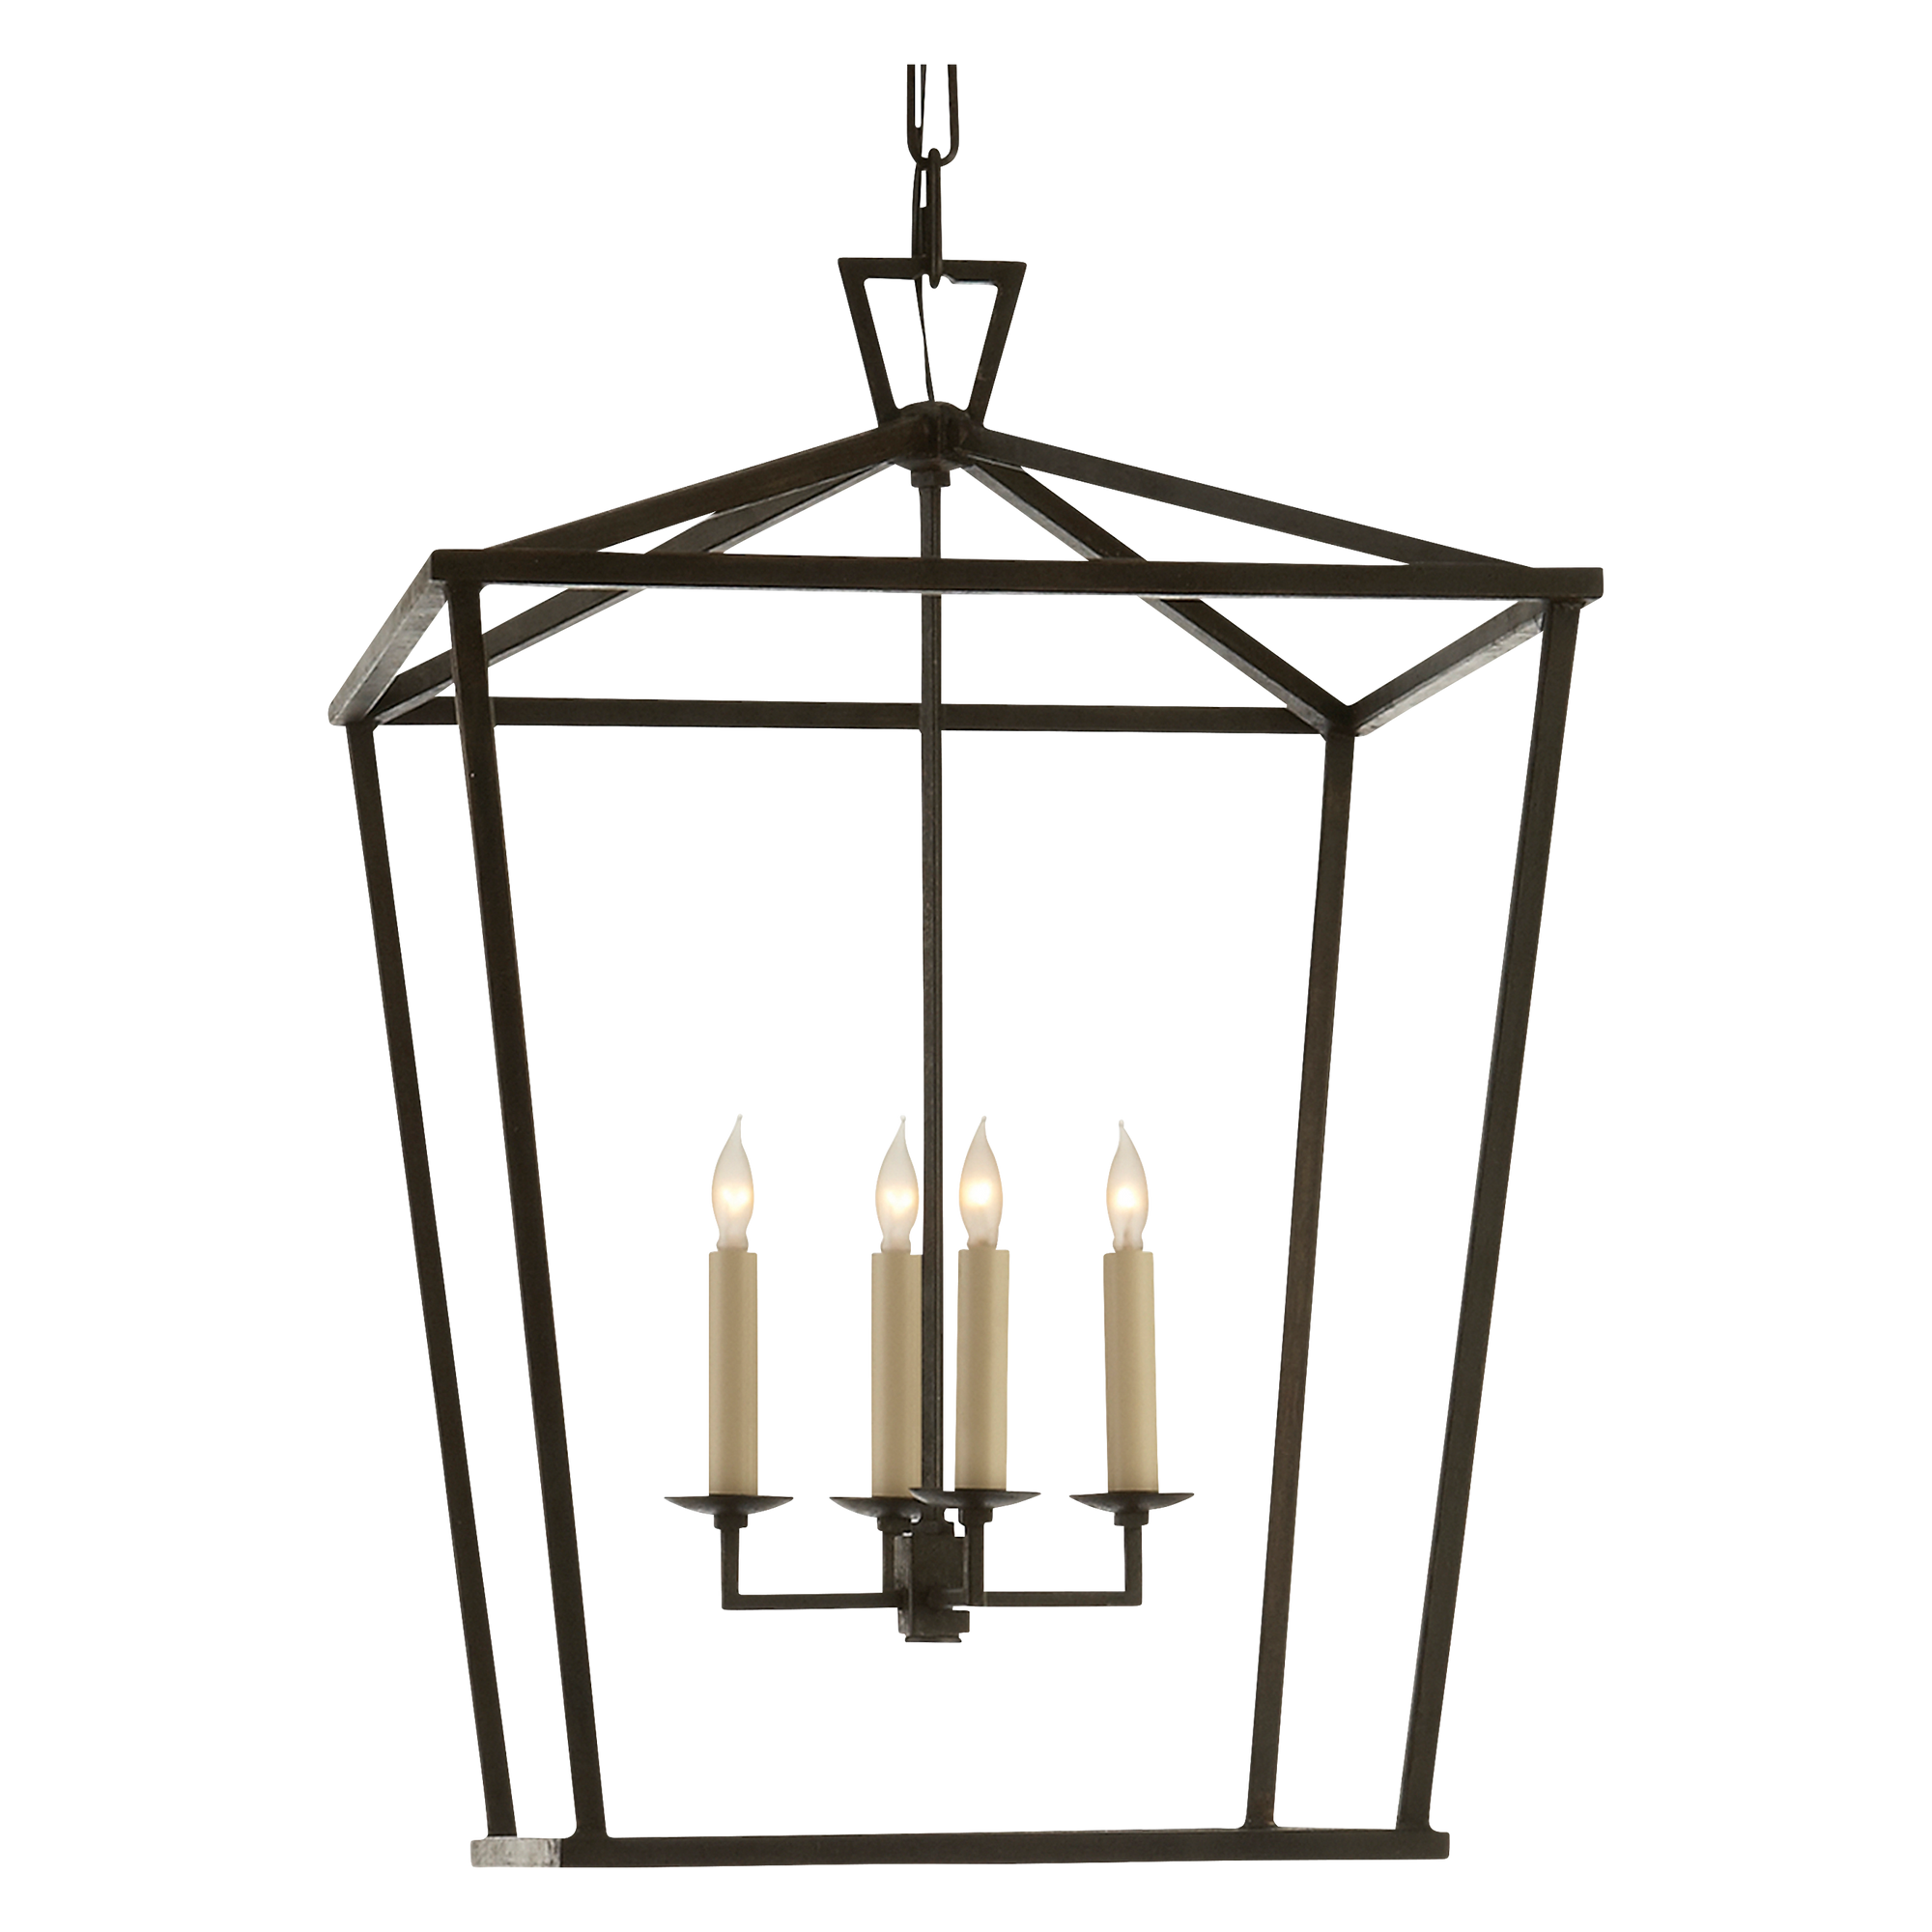 A modern lantern pendant featuring an open metalwork frame in an aged iron finish.